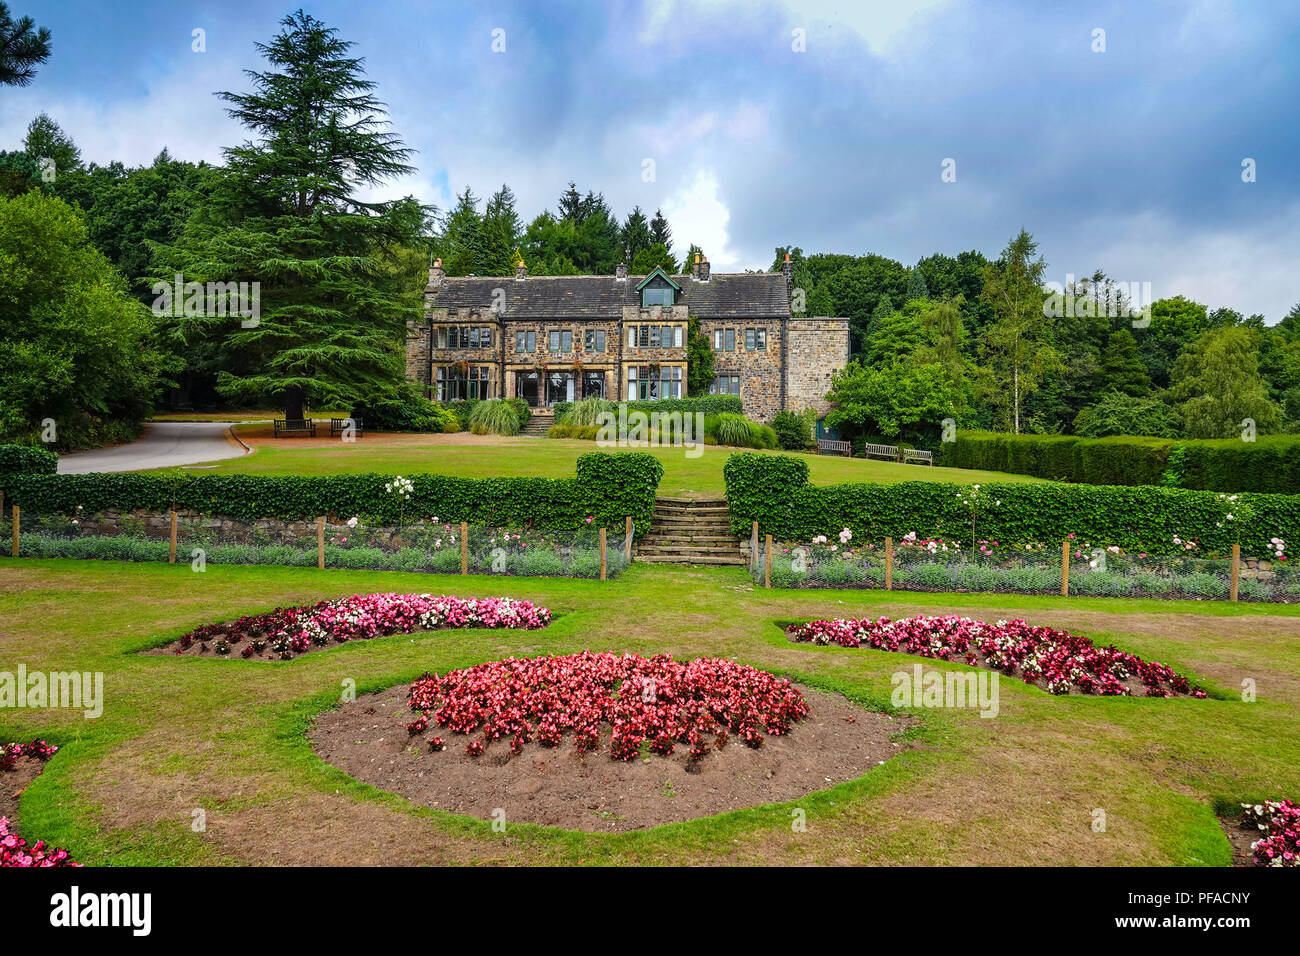 House and flowerbeds, Whirlowbrook Hall, Whirlowdale Park, Whirlow, Sheffield, South Yorkshire, England, UK Stock Photo